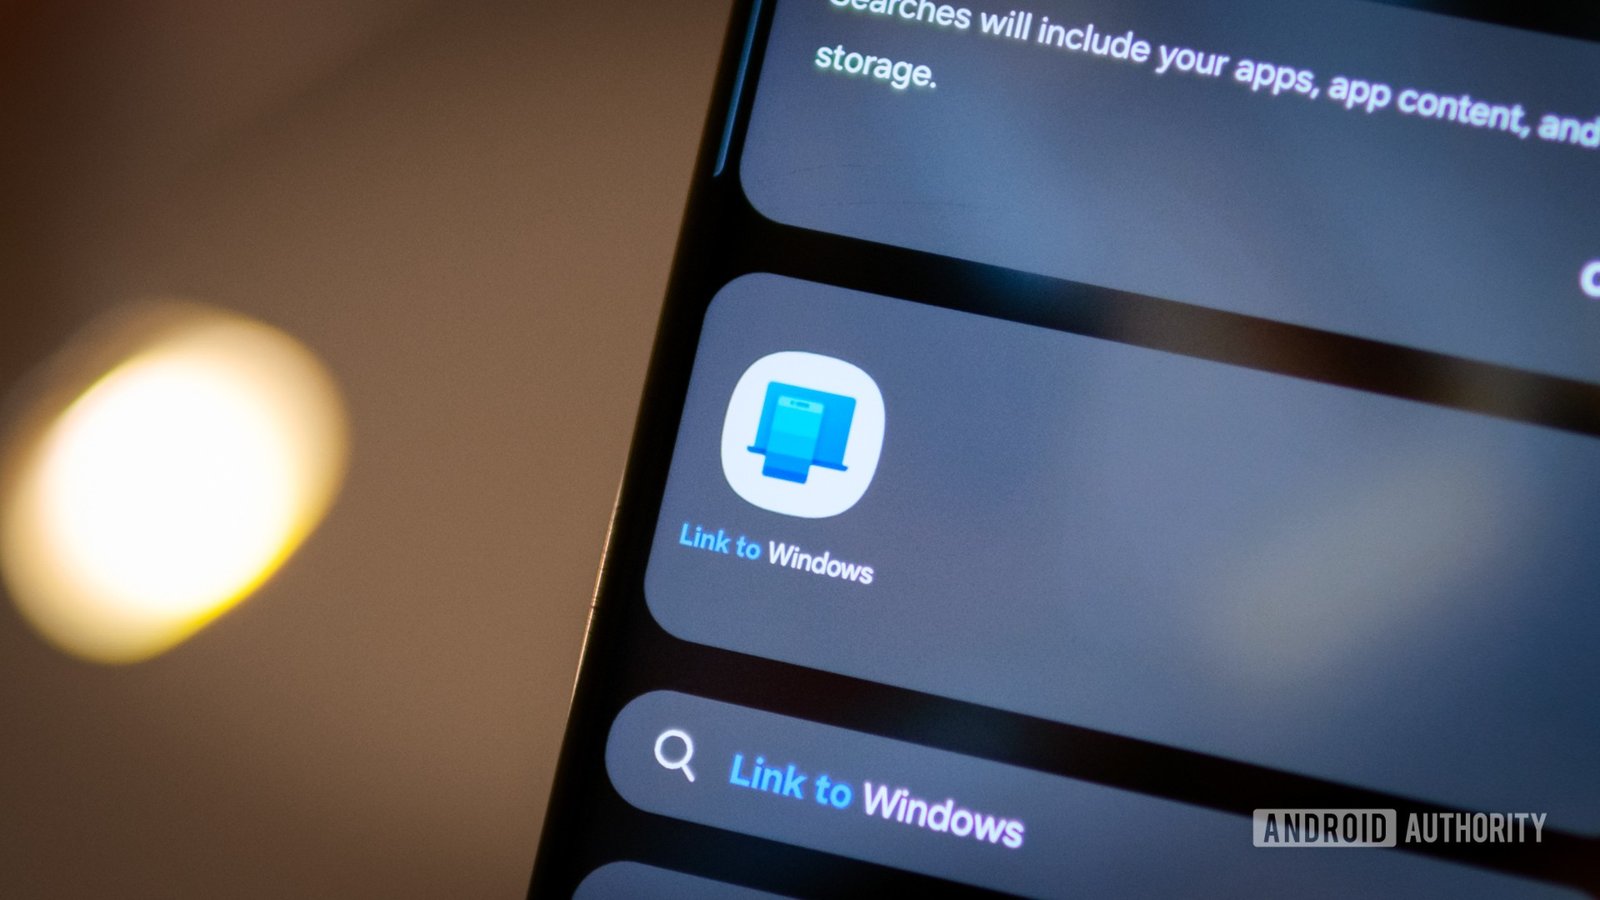 Phone Link may soon add your Android device to Windows File Explorer